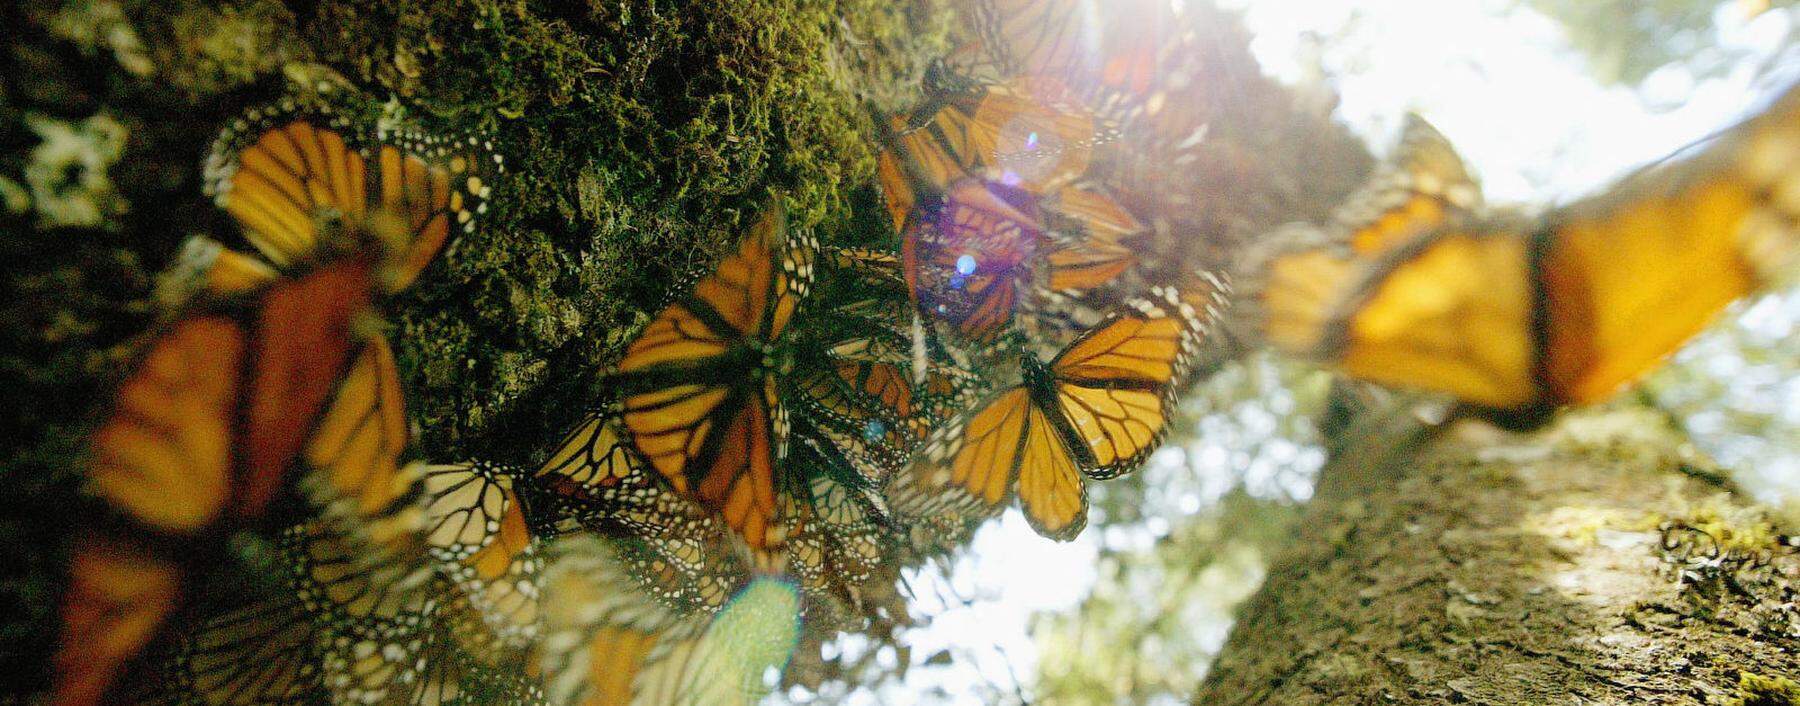 MONARCH BUTTERFLIES LINE A TREE TRUNK AS OTHERS FALL AWAY IN MEXICO.